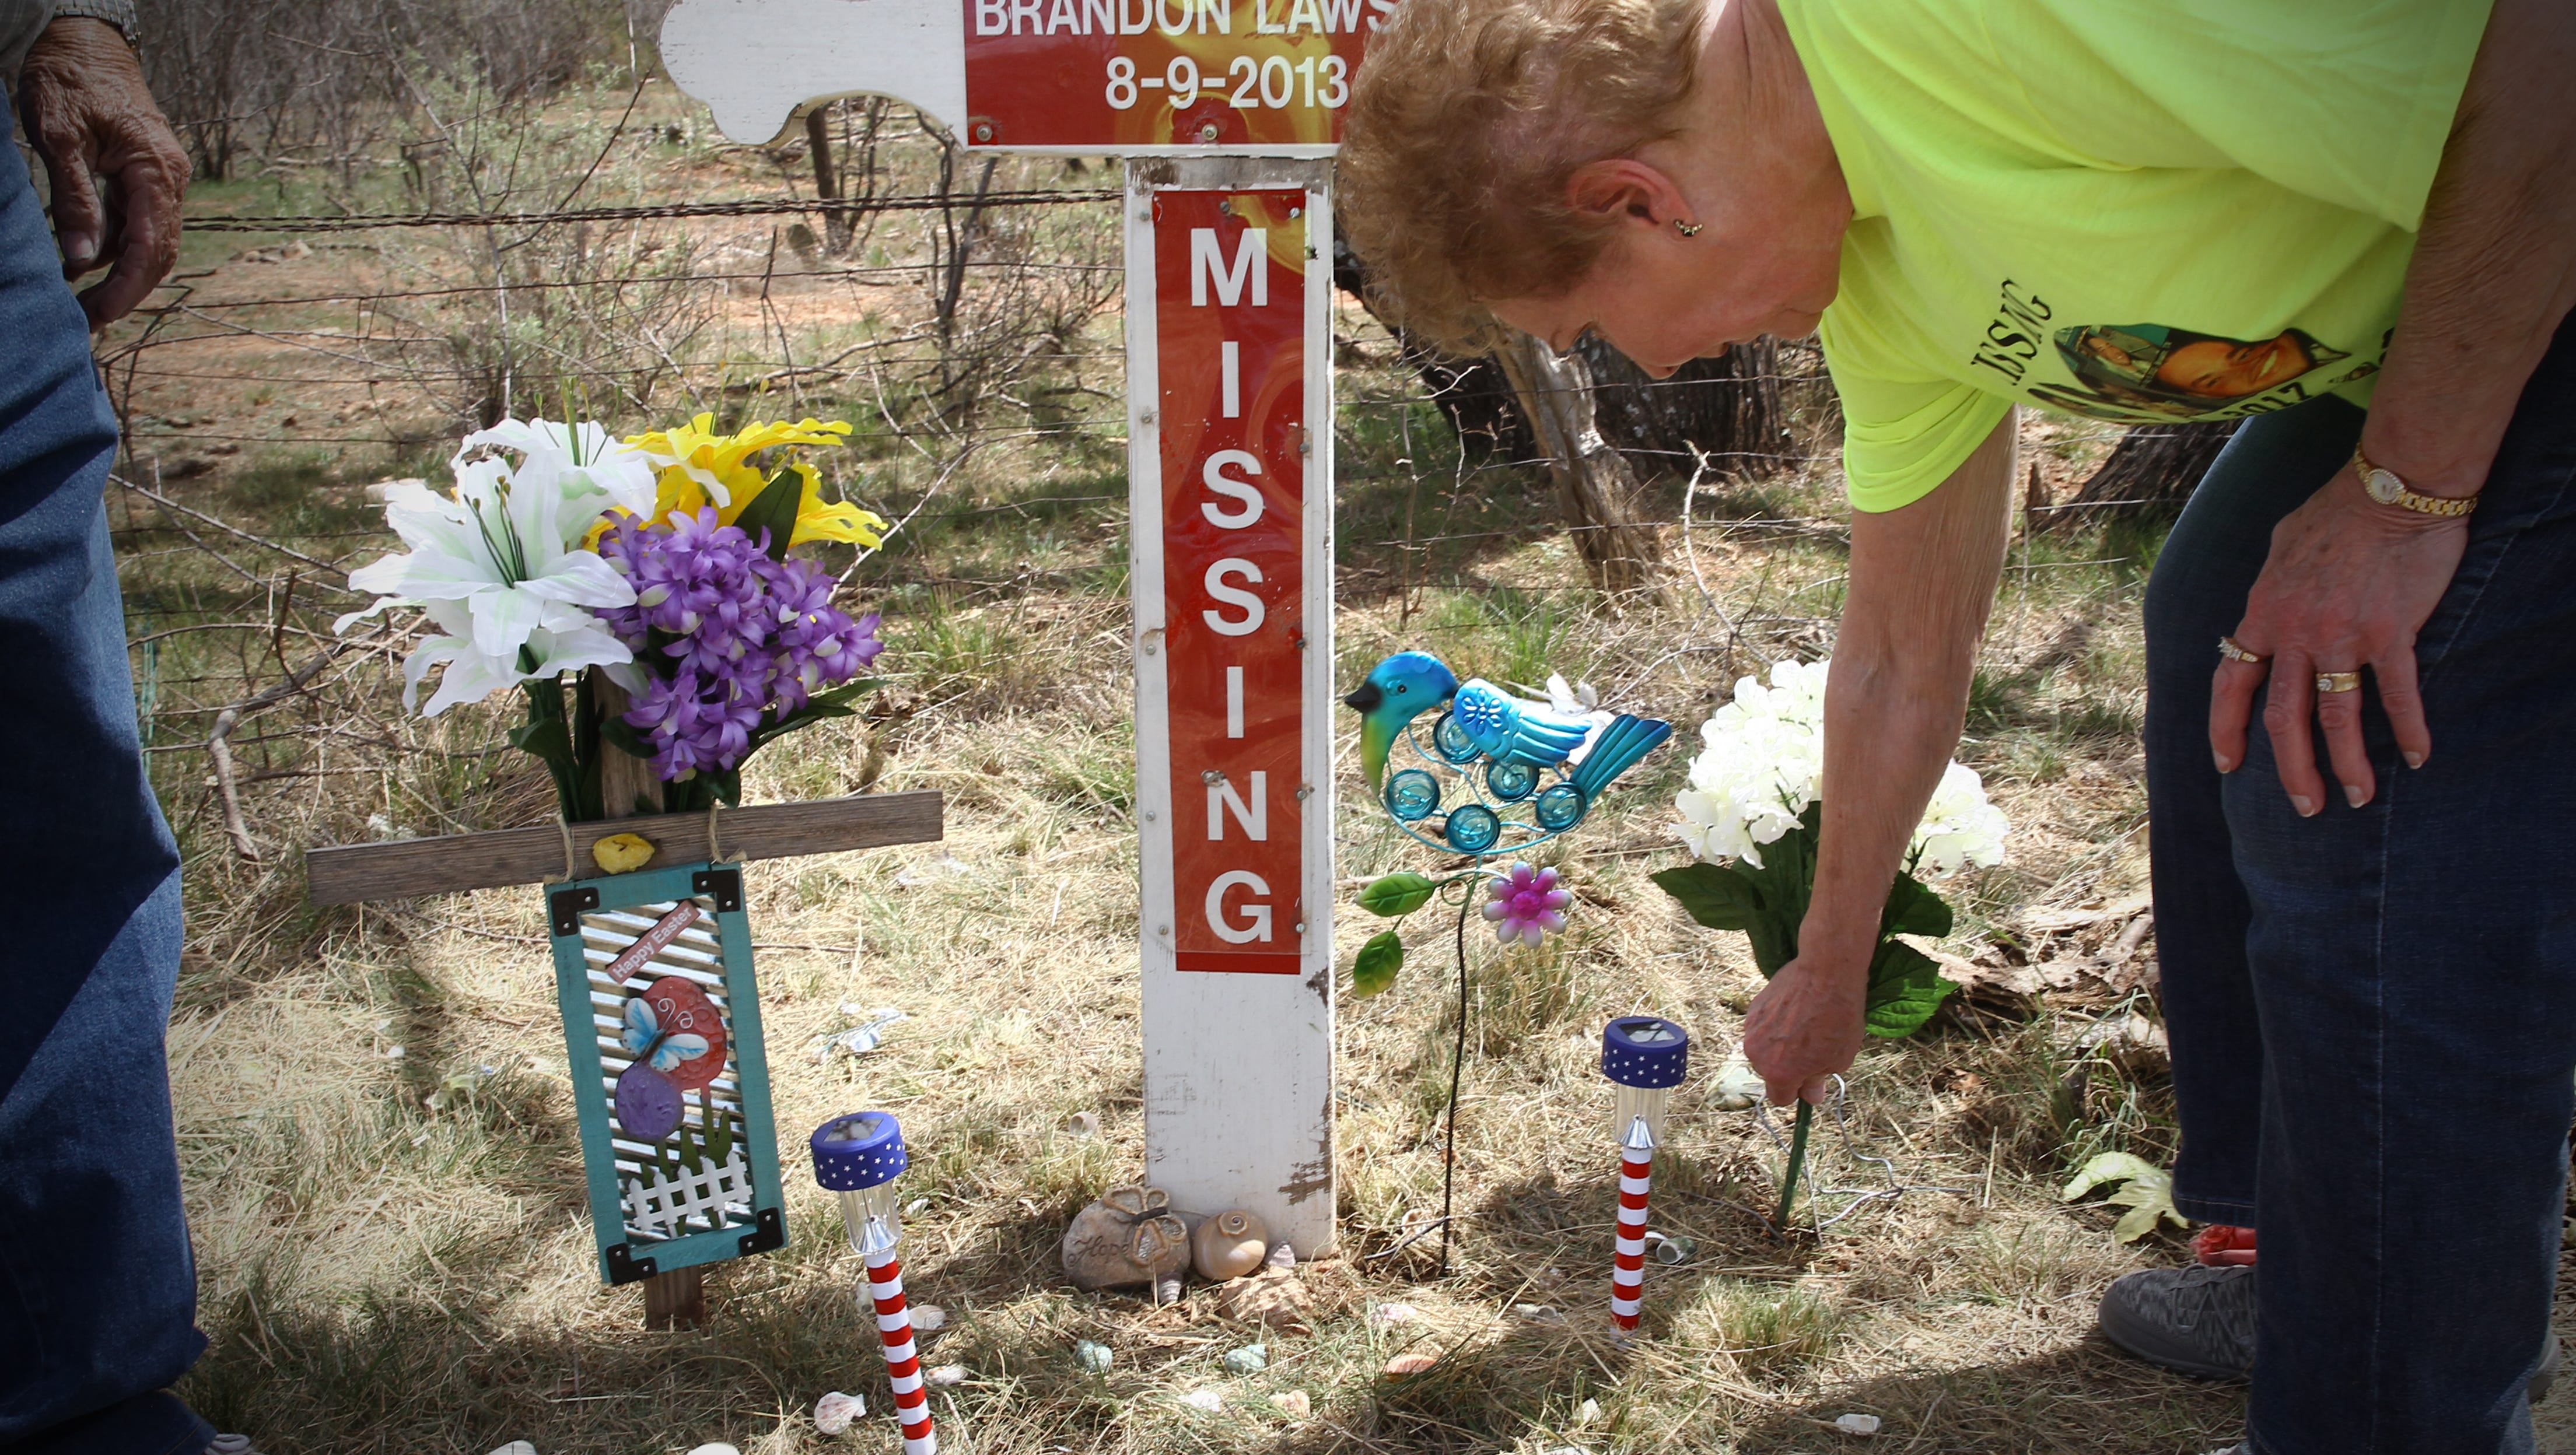 At accelerere Hane vedlægge The mystery around the disappearance of Brandon Lawson in West Texas